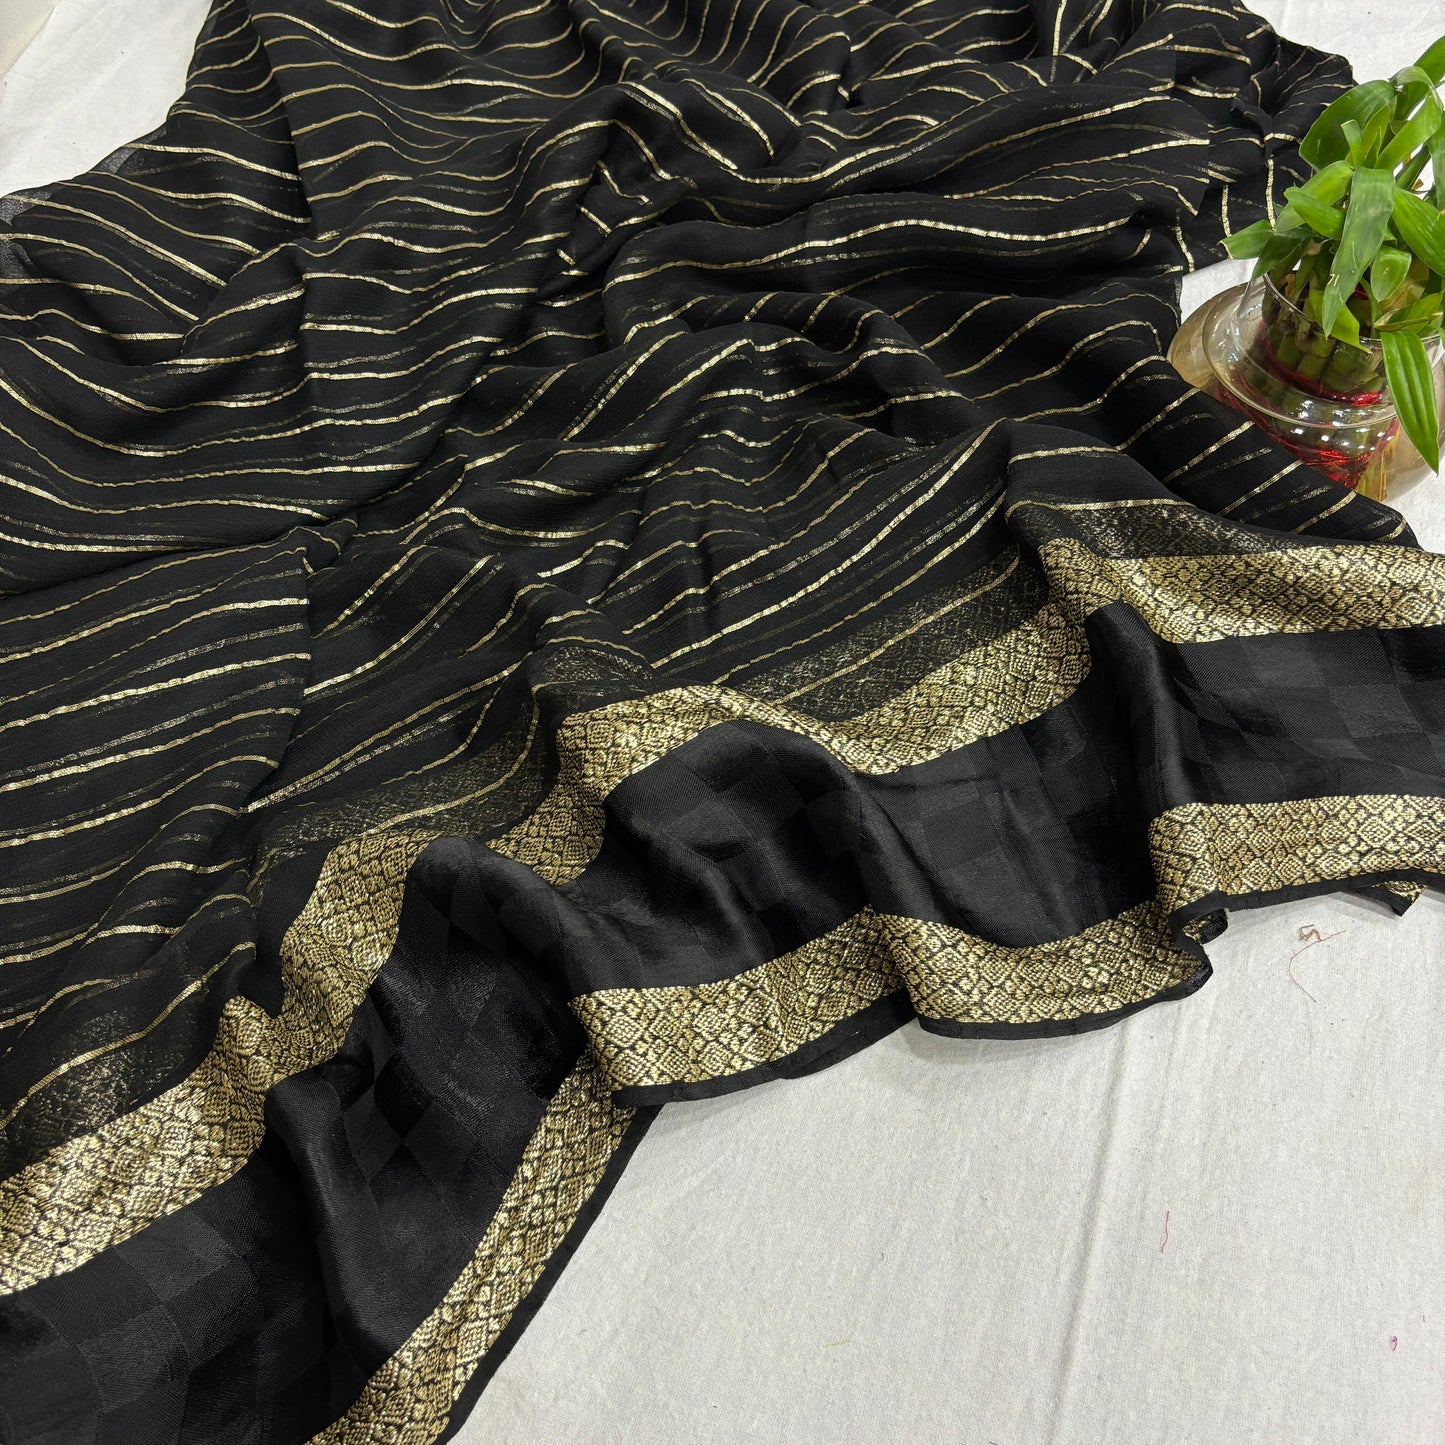 Black Color Pure Viscose Georgette With Self Satin Chex Jacquard Border With Stripes Linning All Over In Body